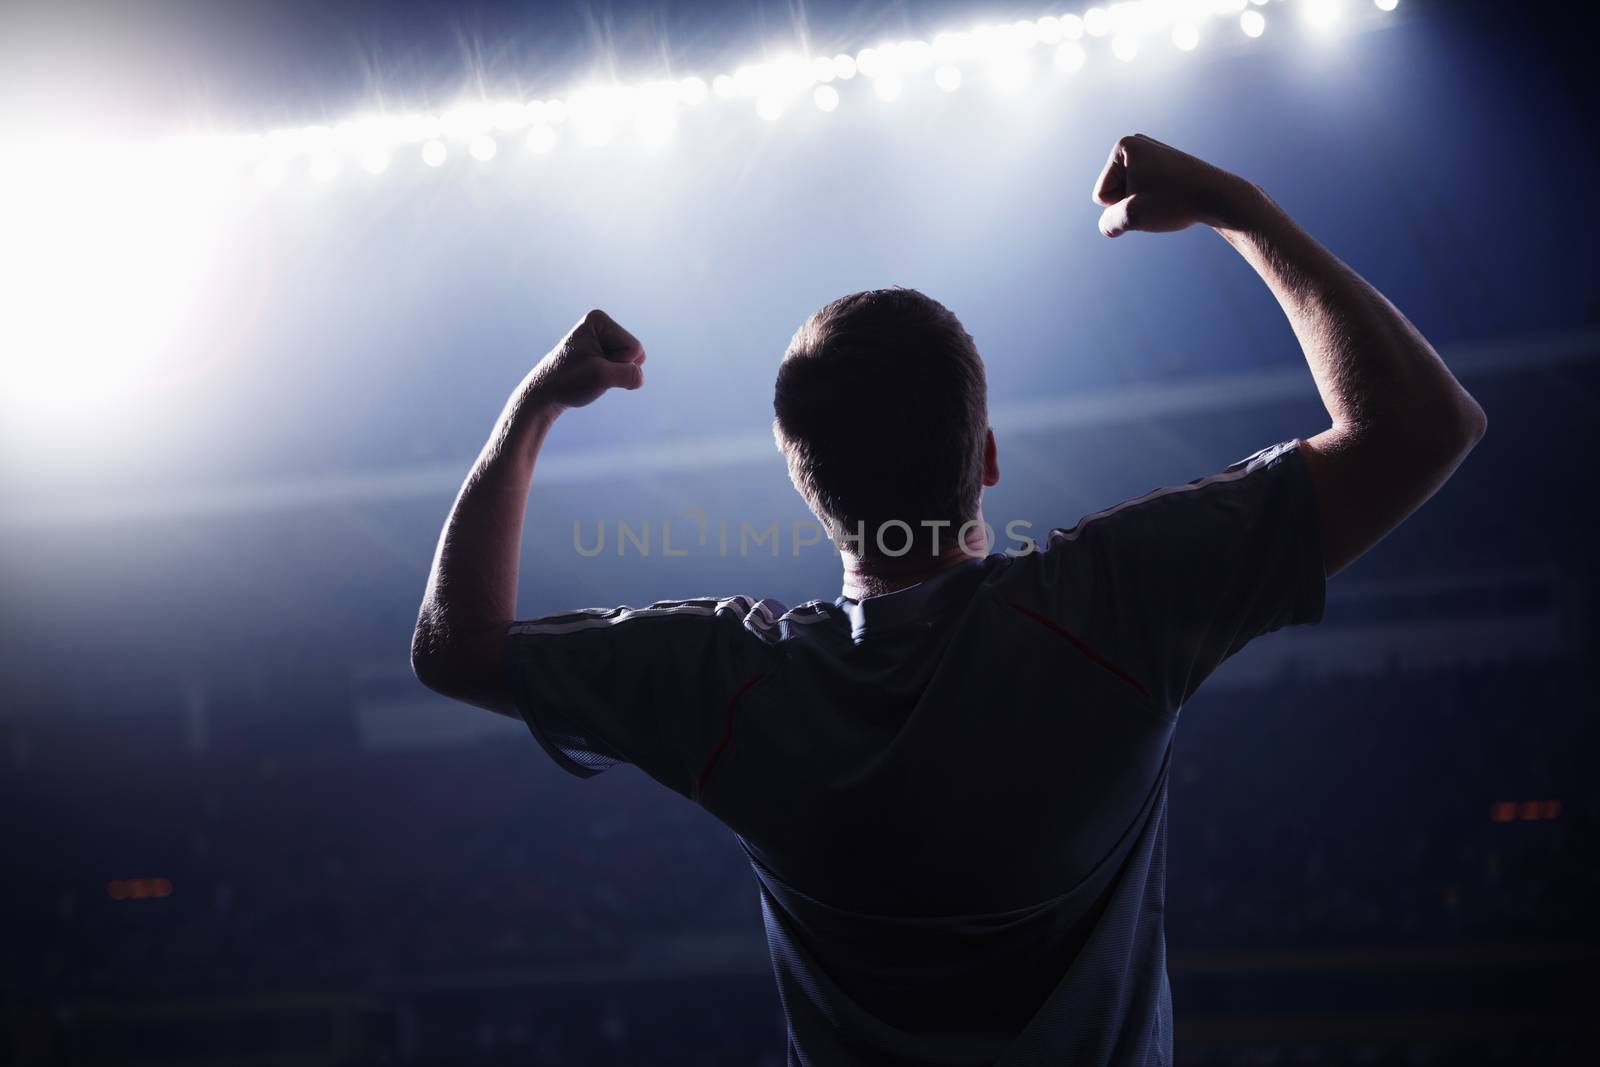 Soccer player with arms raised cheering, stadium at night time by XiXinXing